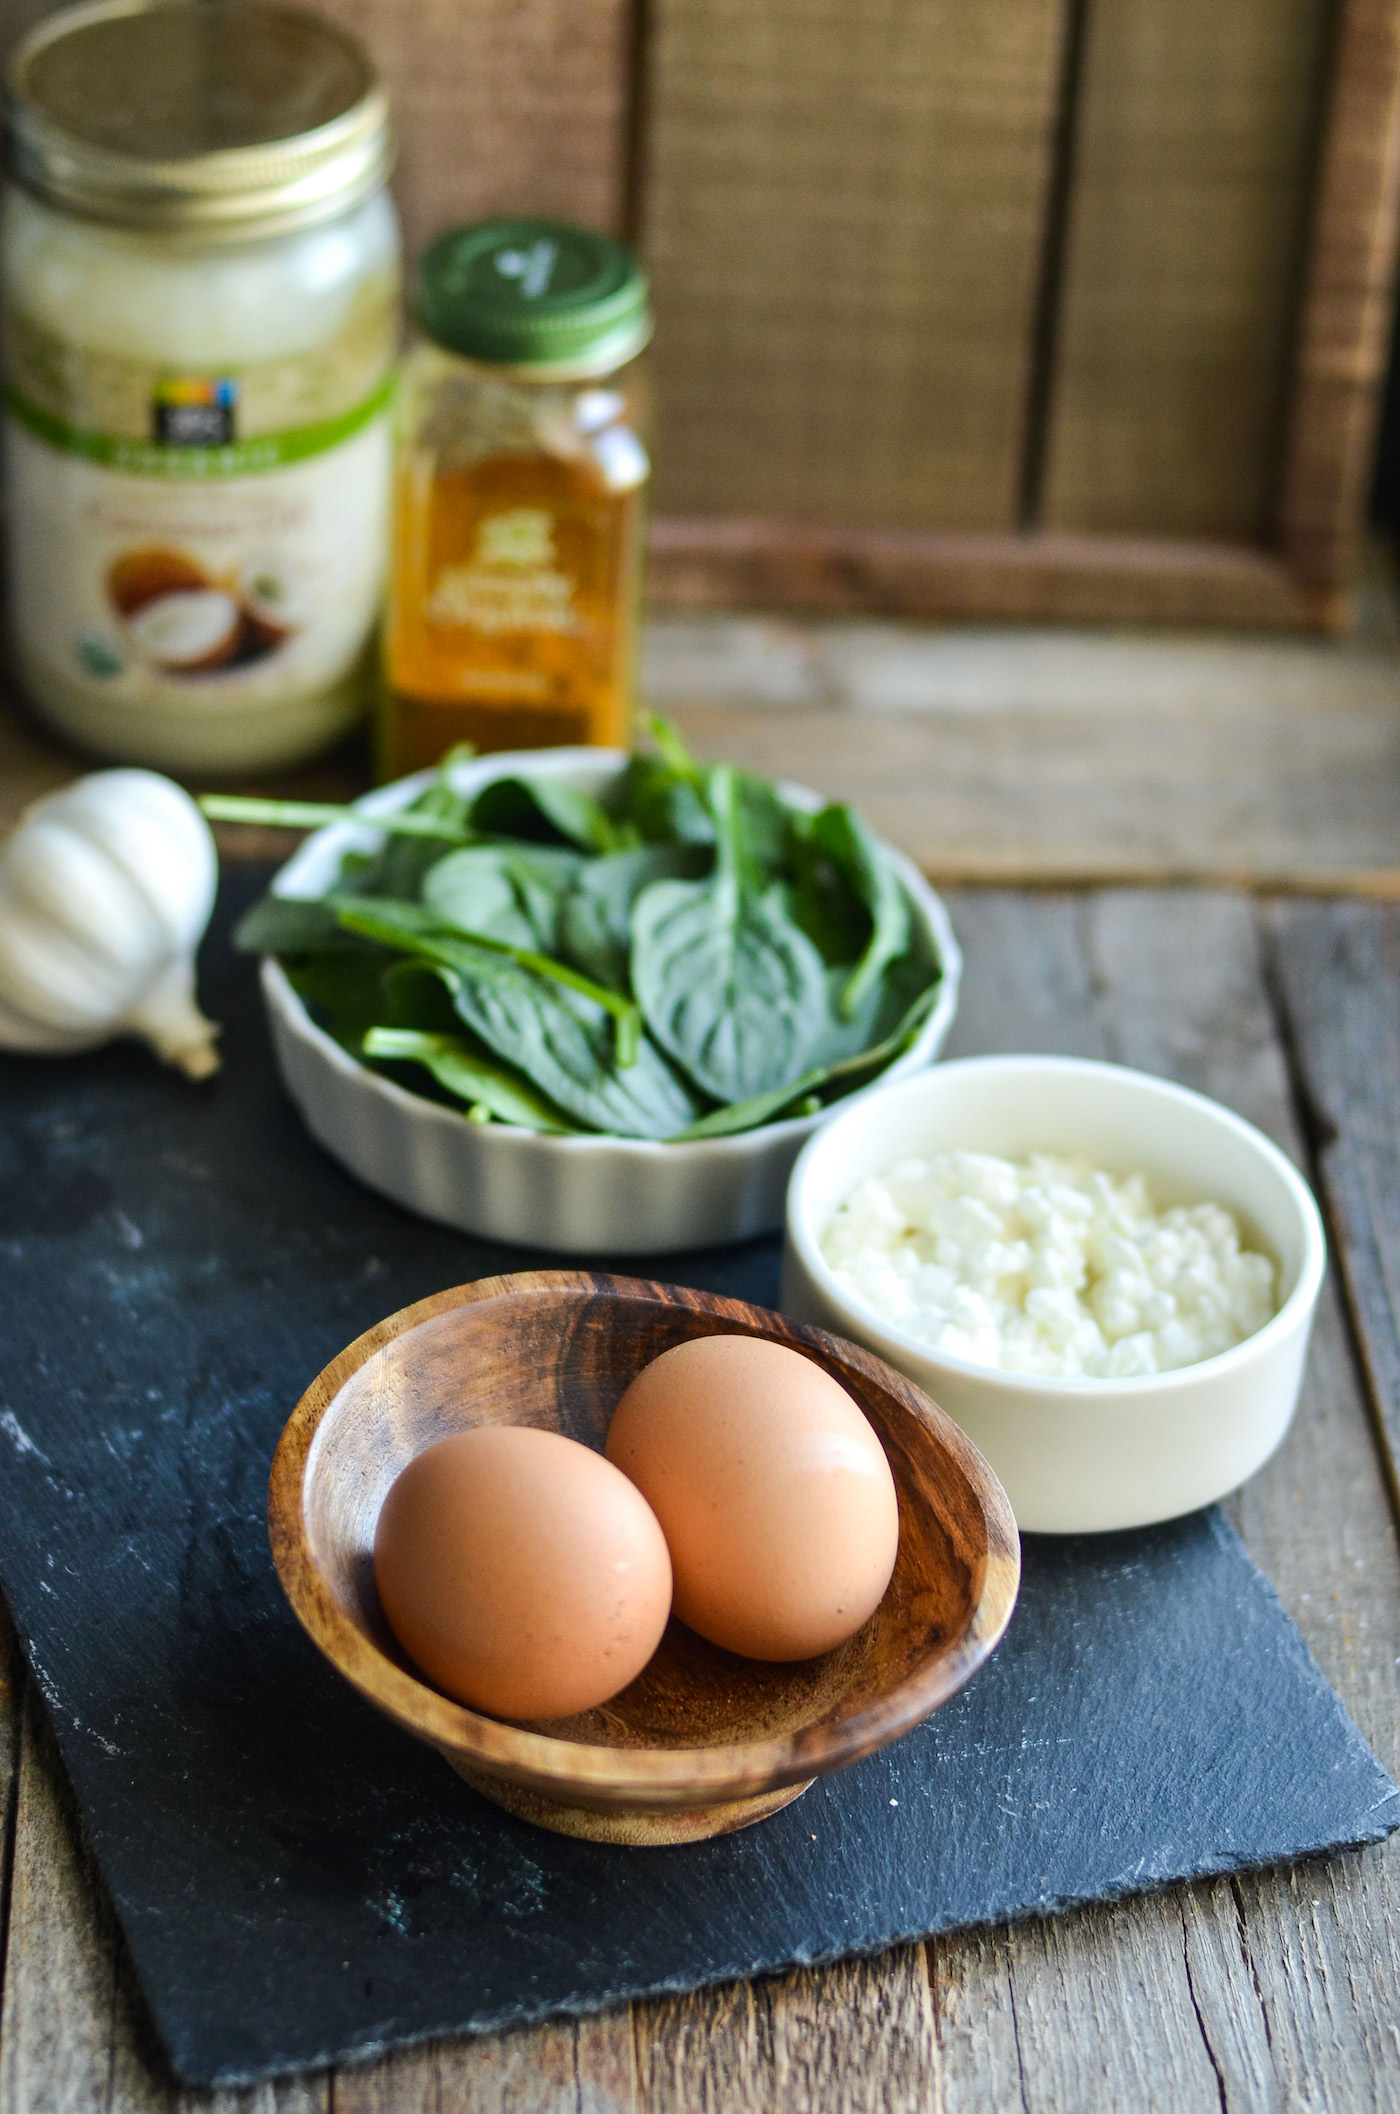 Spinach, cottage cheese, and eggs